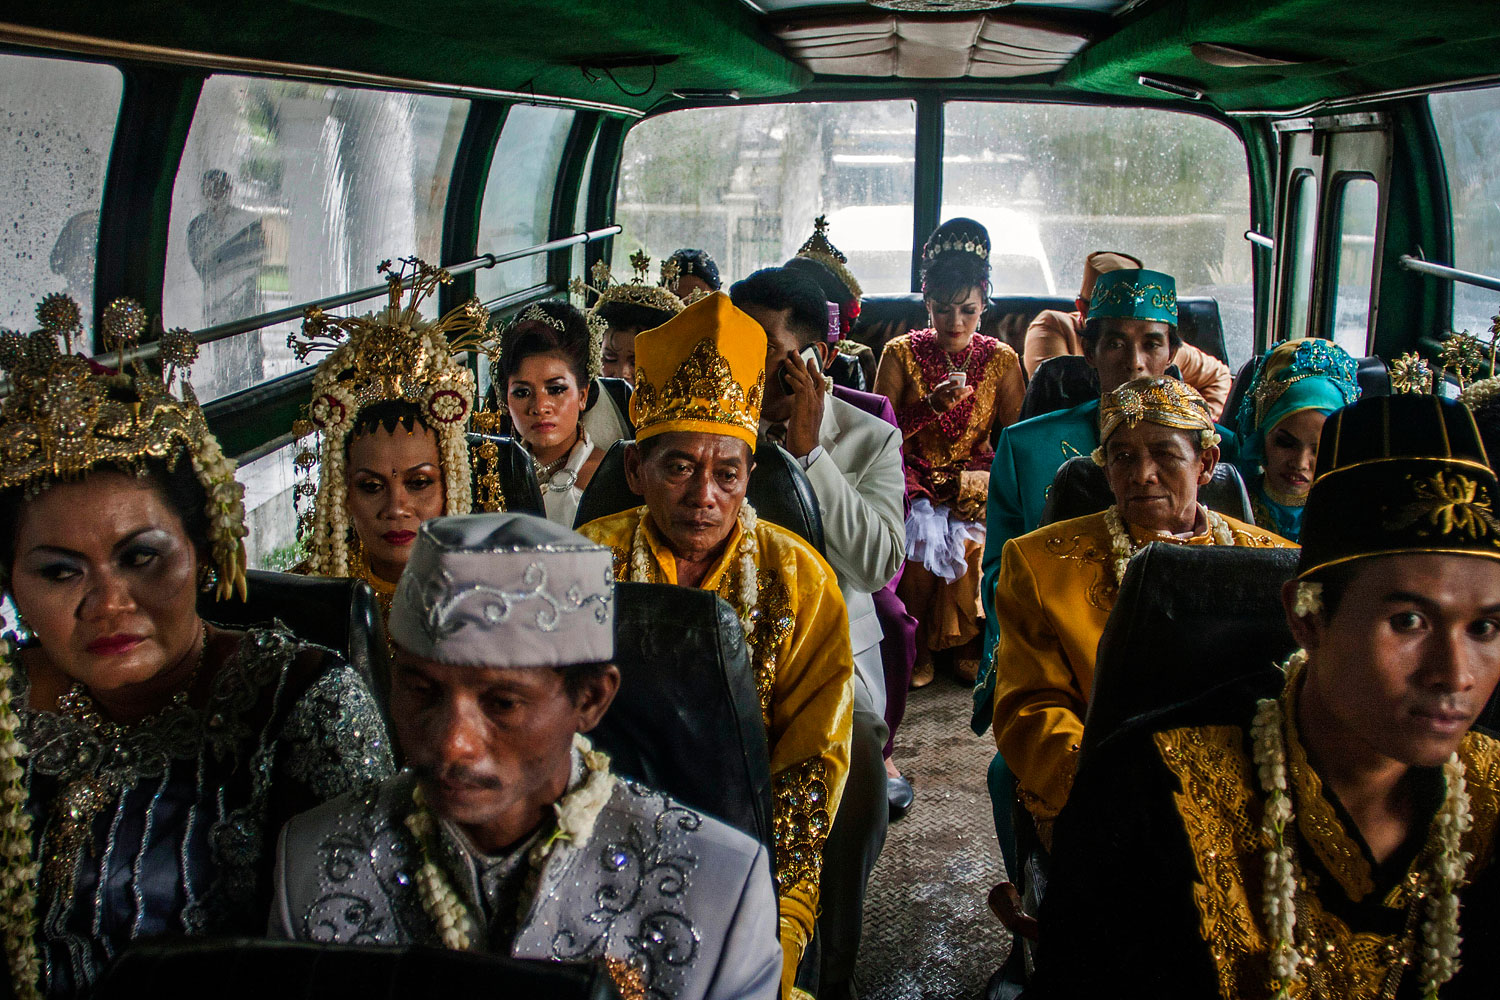 image: Brides and grooms ride a bus in a parade during a mass wedding ceremony in Yogyakarta, Indonesia.